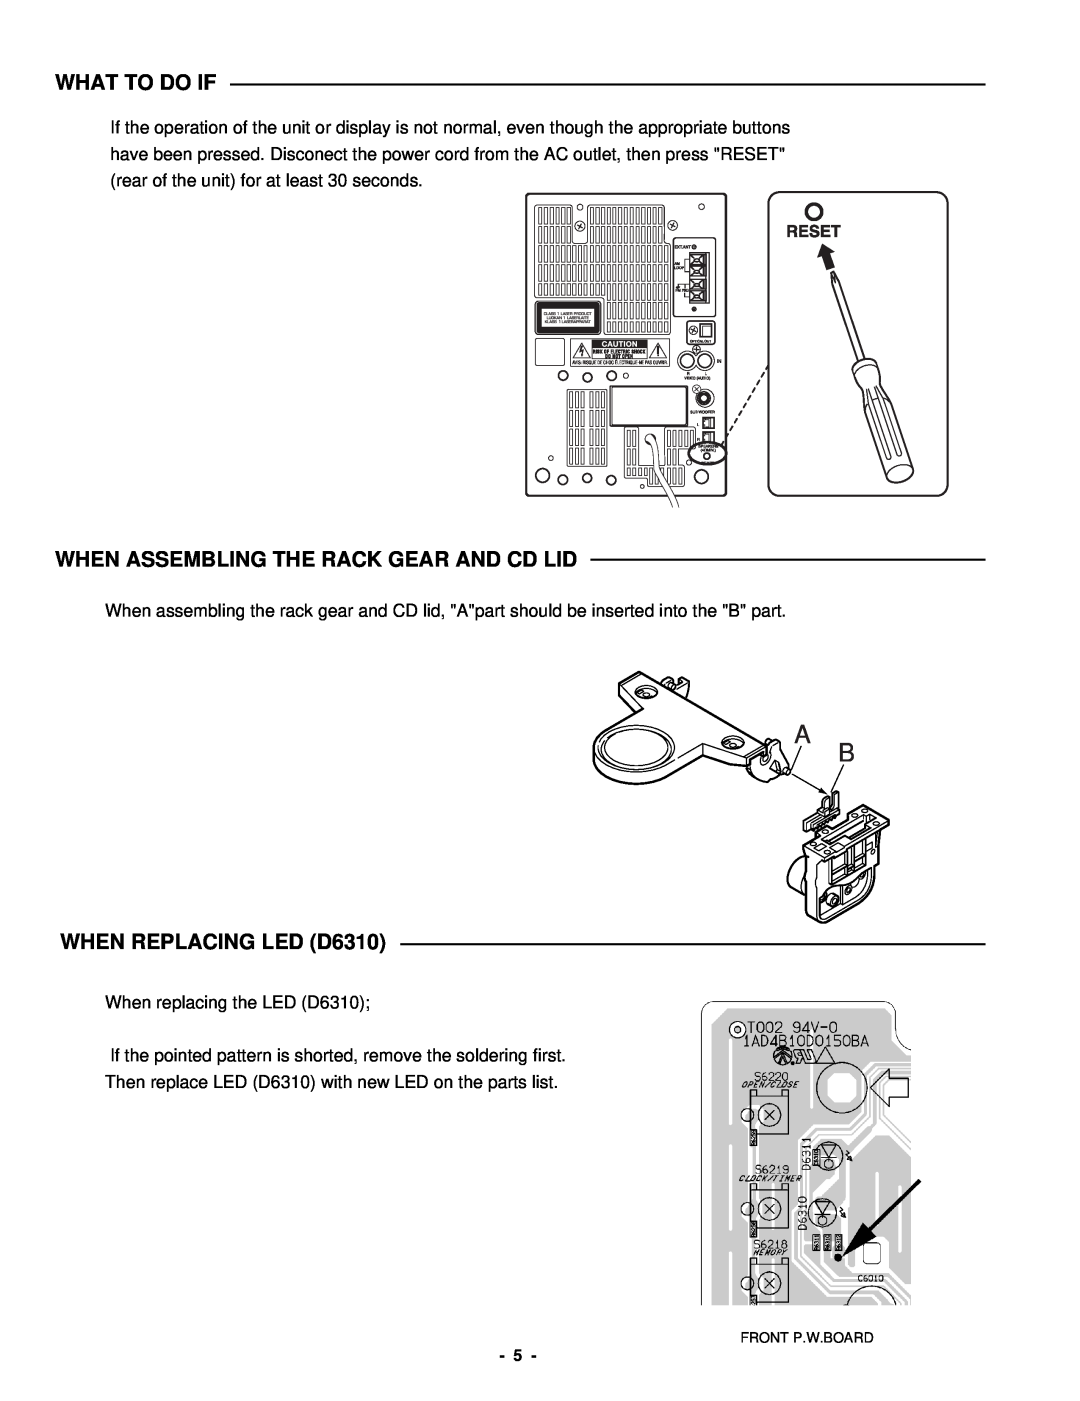 Sanyo DC-DA370 service manual What To Do If, When Assembling The Rack Gear And Cd Lid, WHEN REPLACING LED D6310 